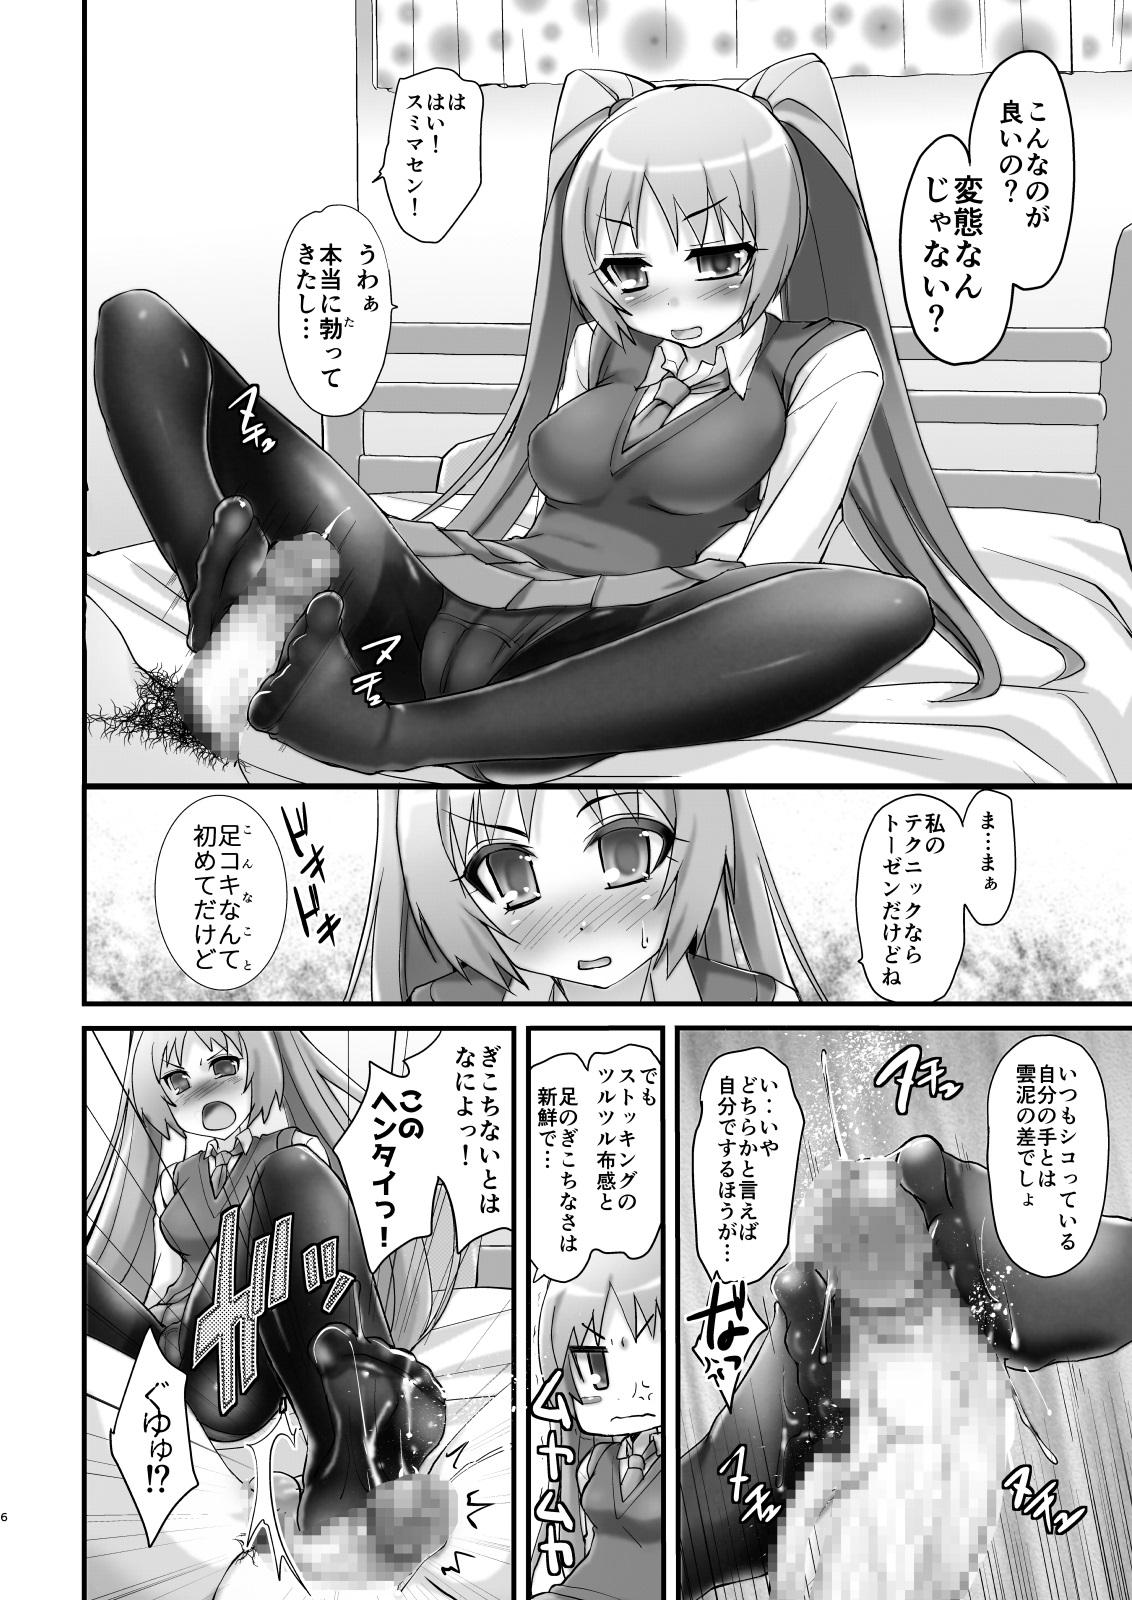 Milfporn Tsundere Tights to Twintails - Original Office Fuck - Page 6